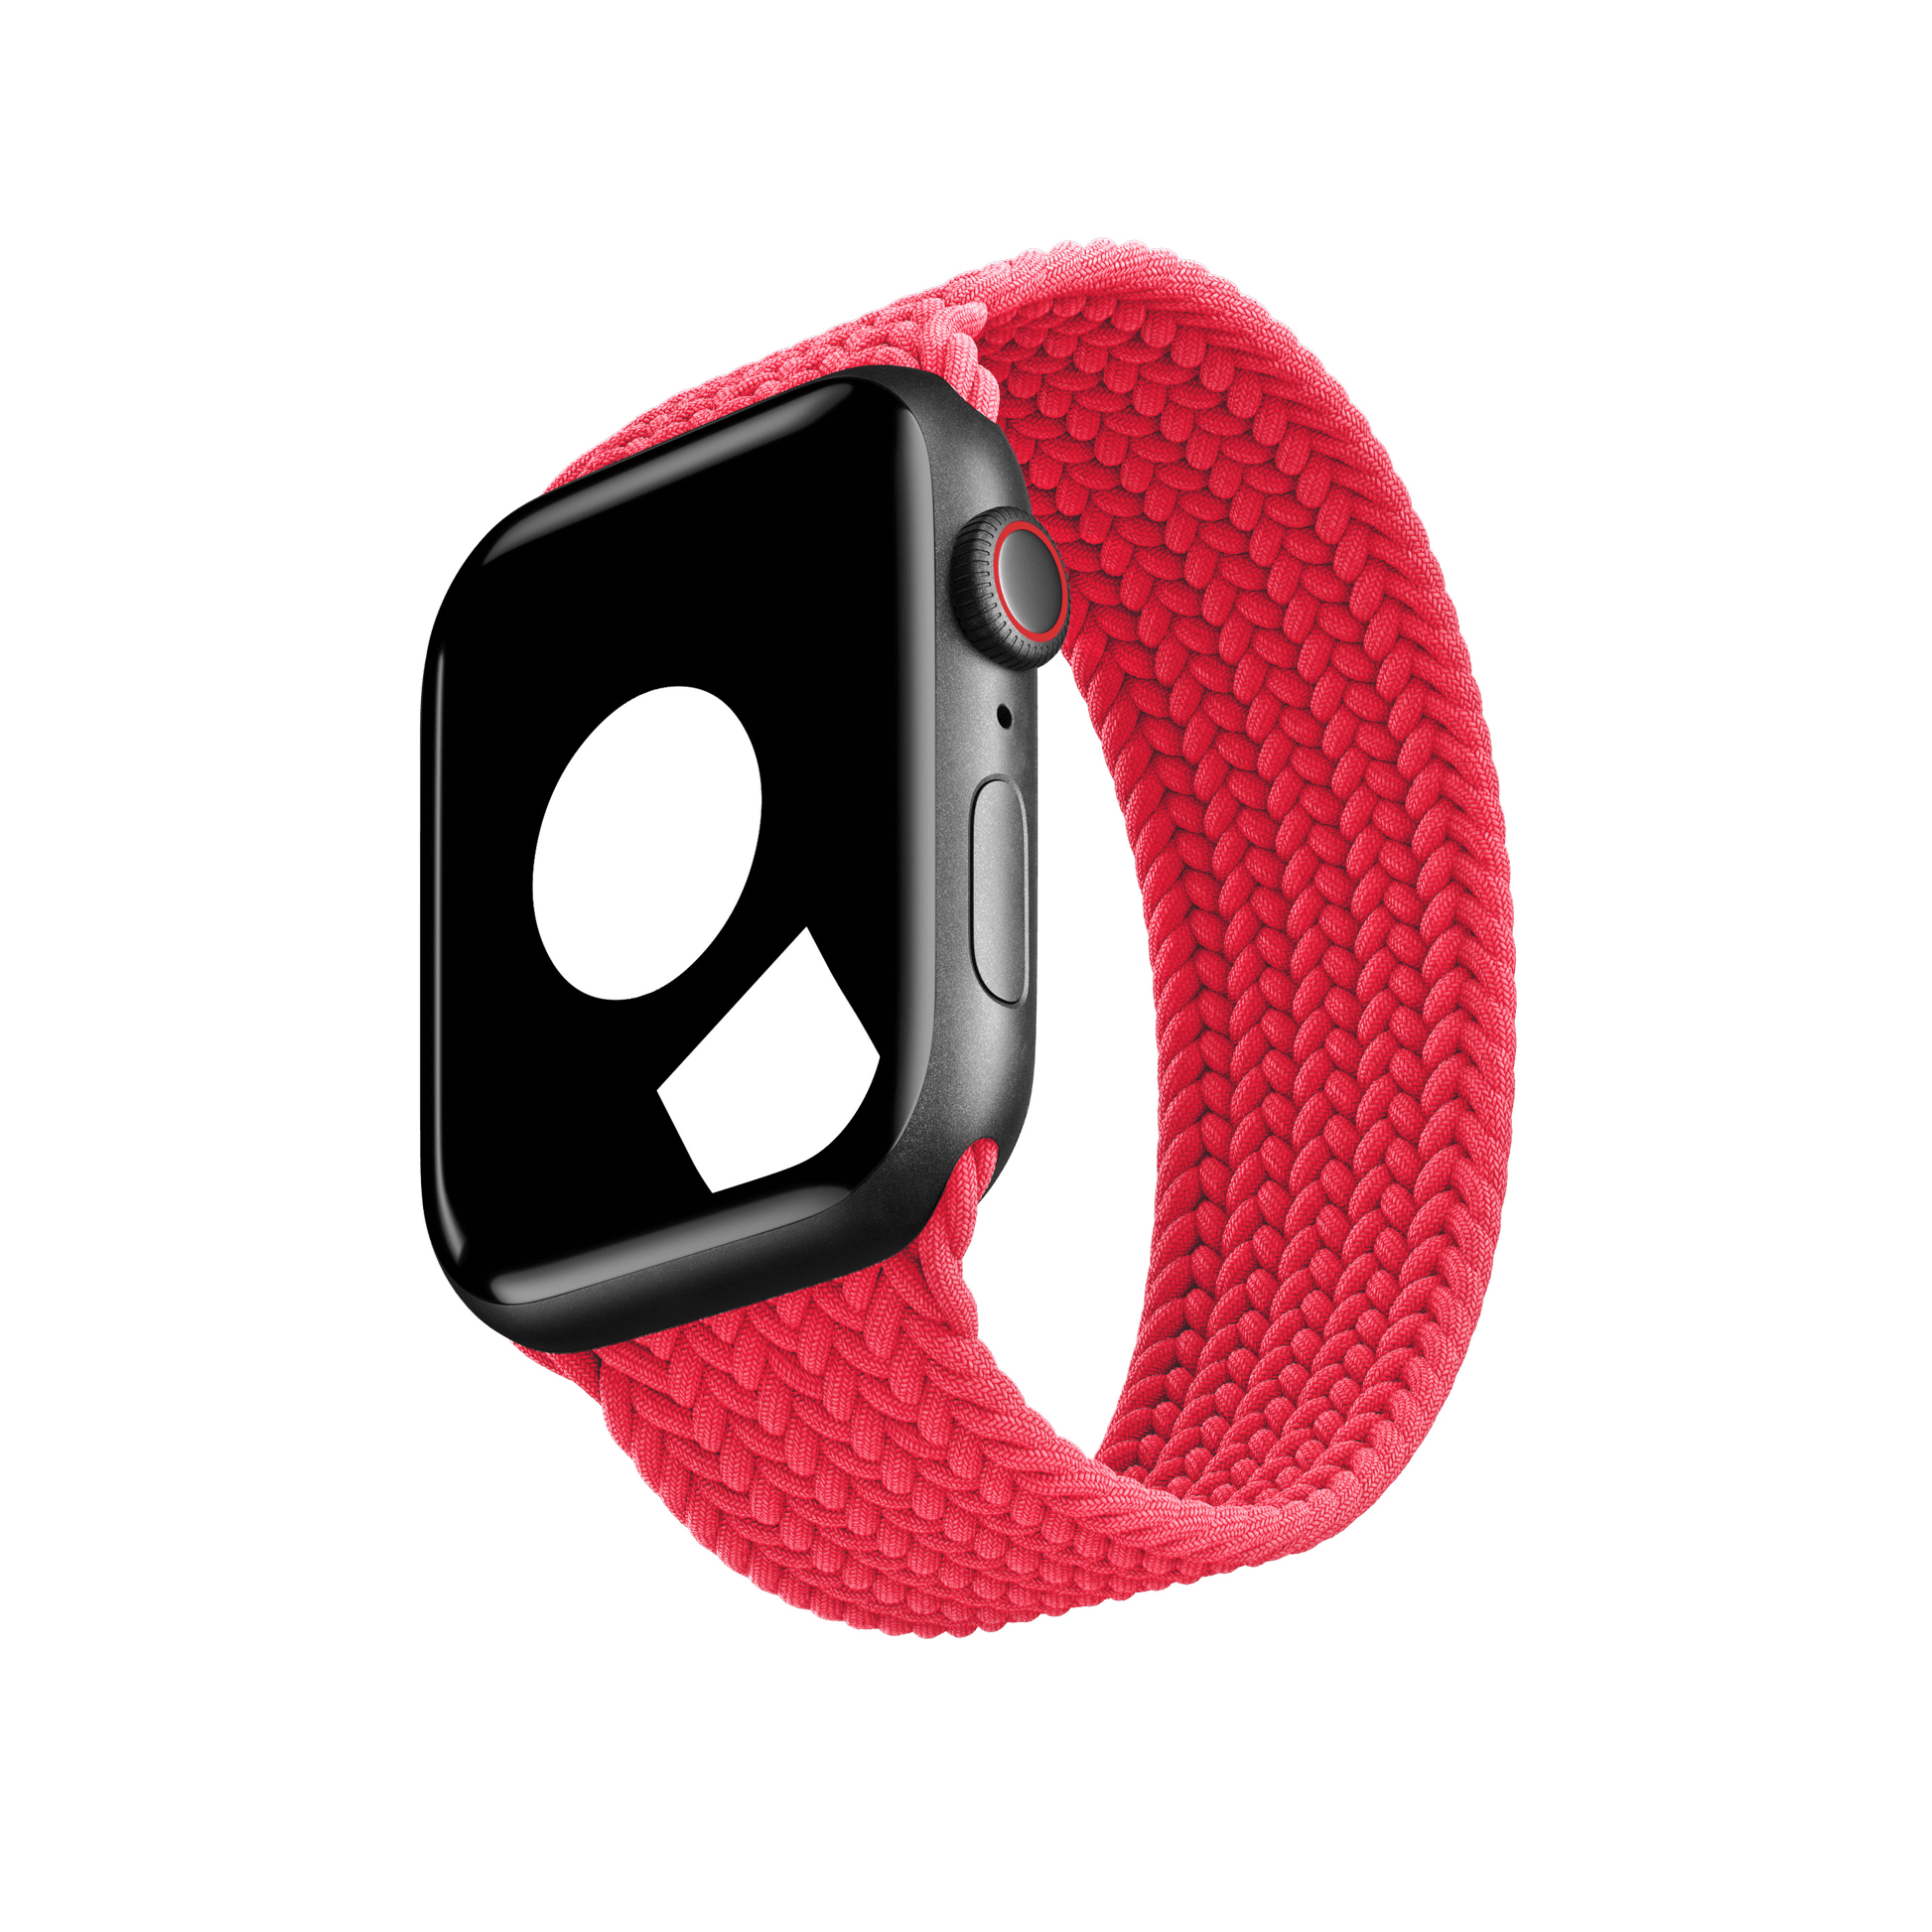 Persimmon Braided Solo Loop for Apple Watch